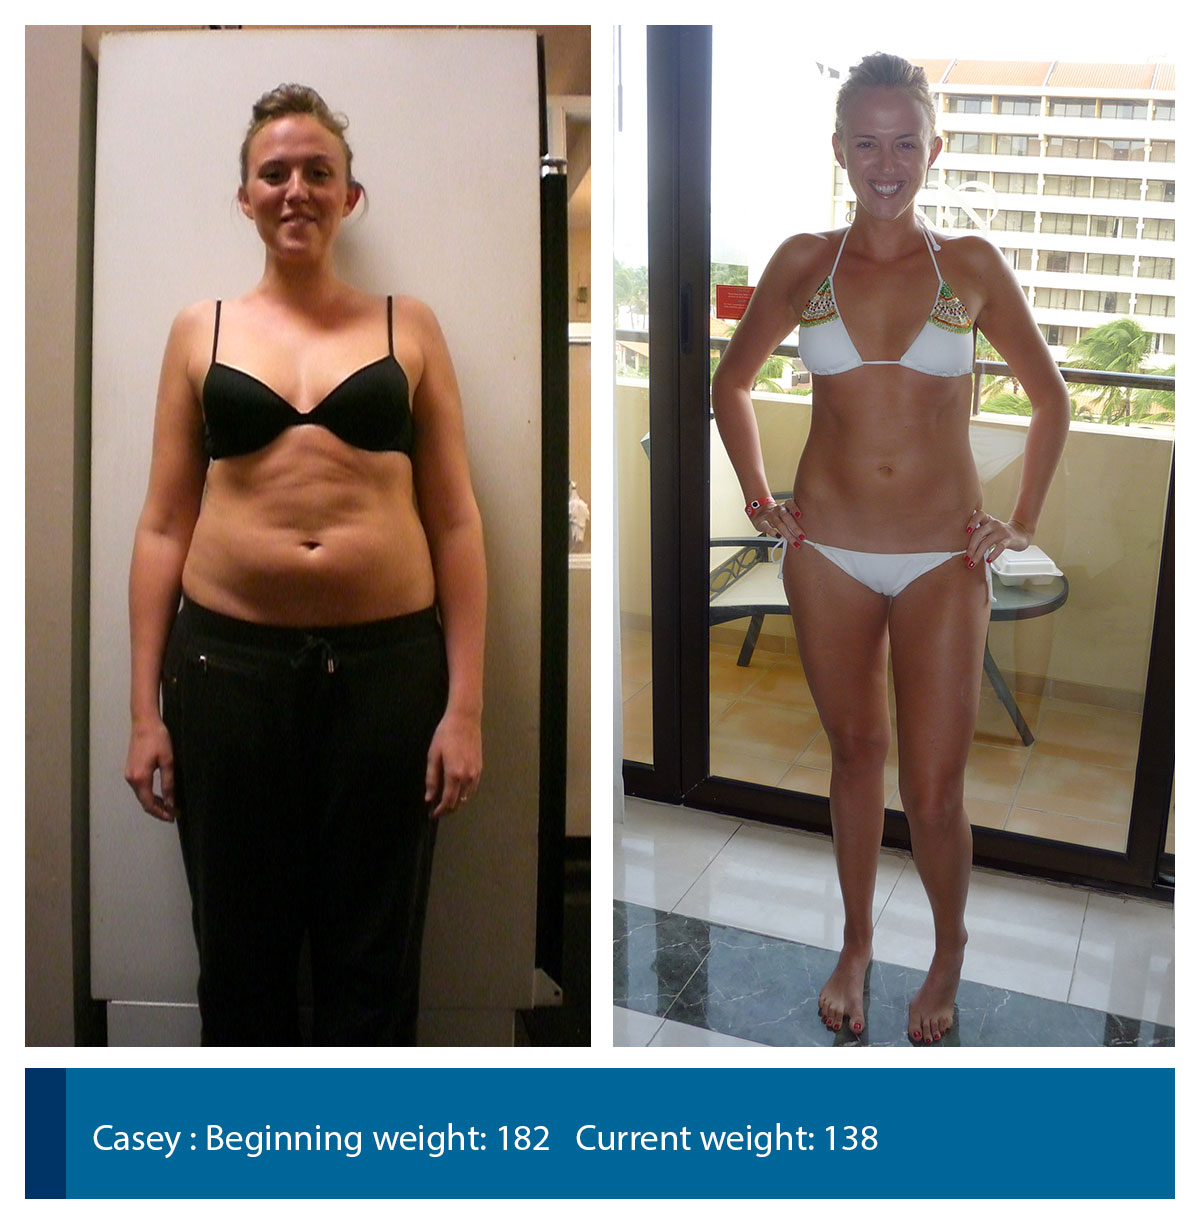 Body Transformation Photos - Before and After - Los Angeles Personal  Training